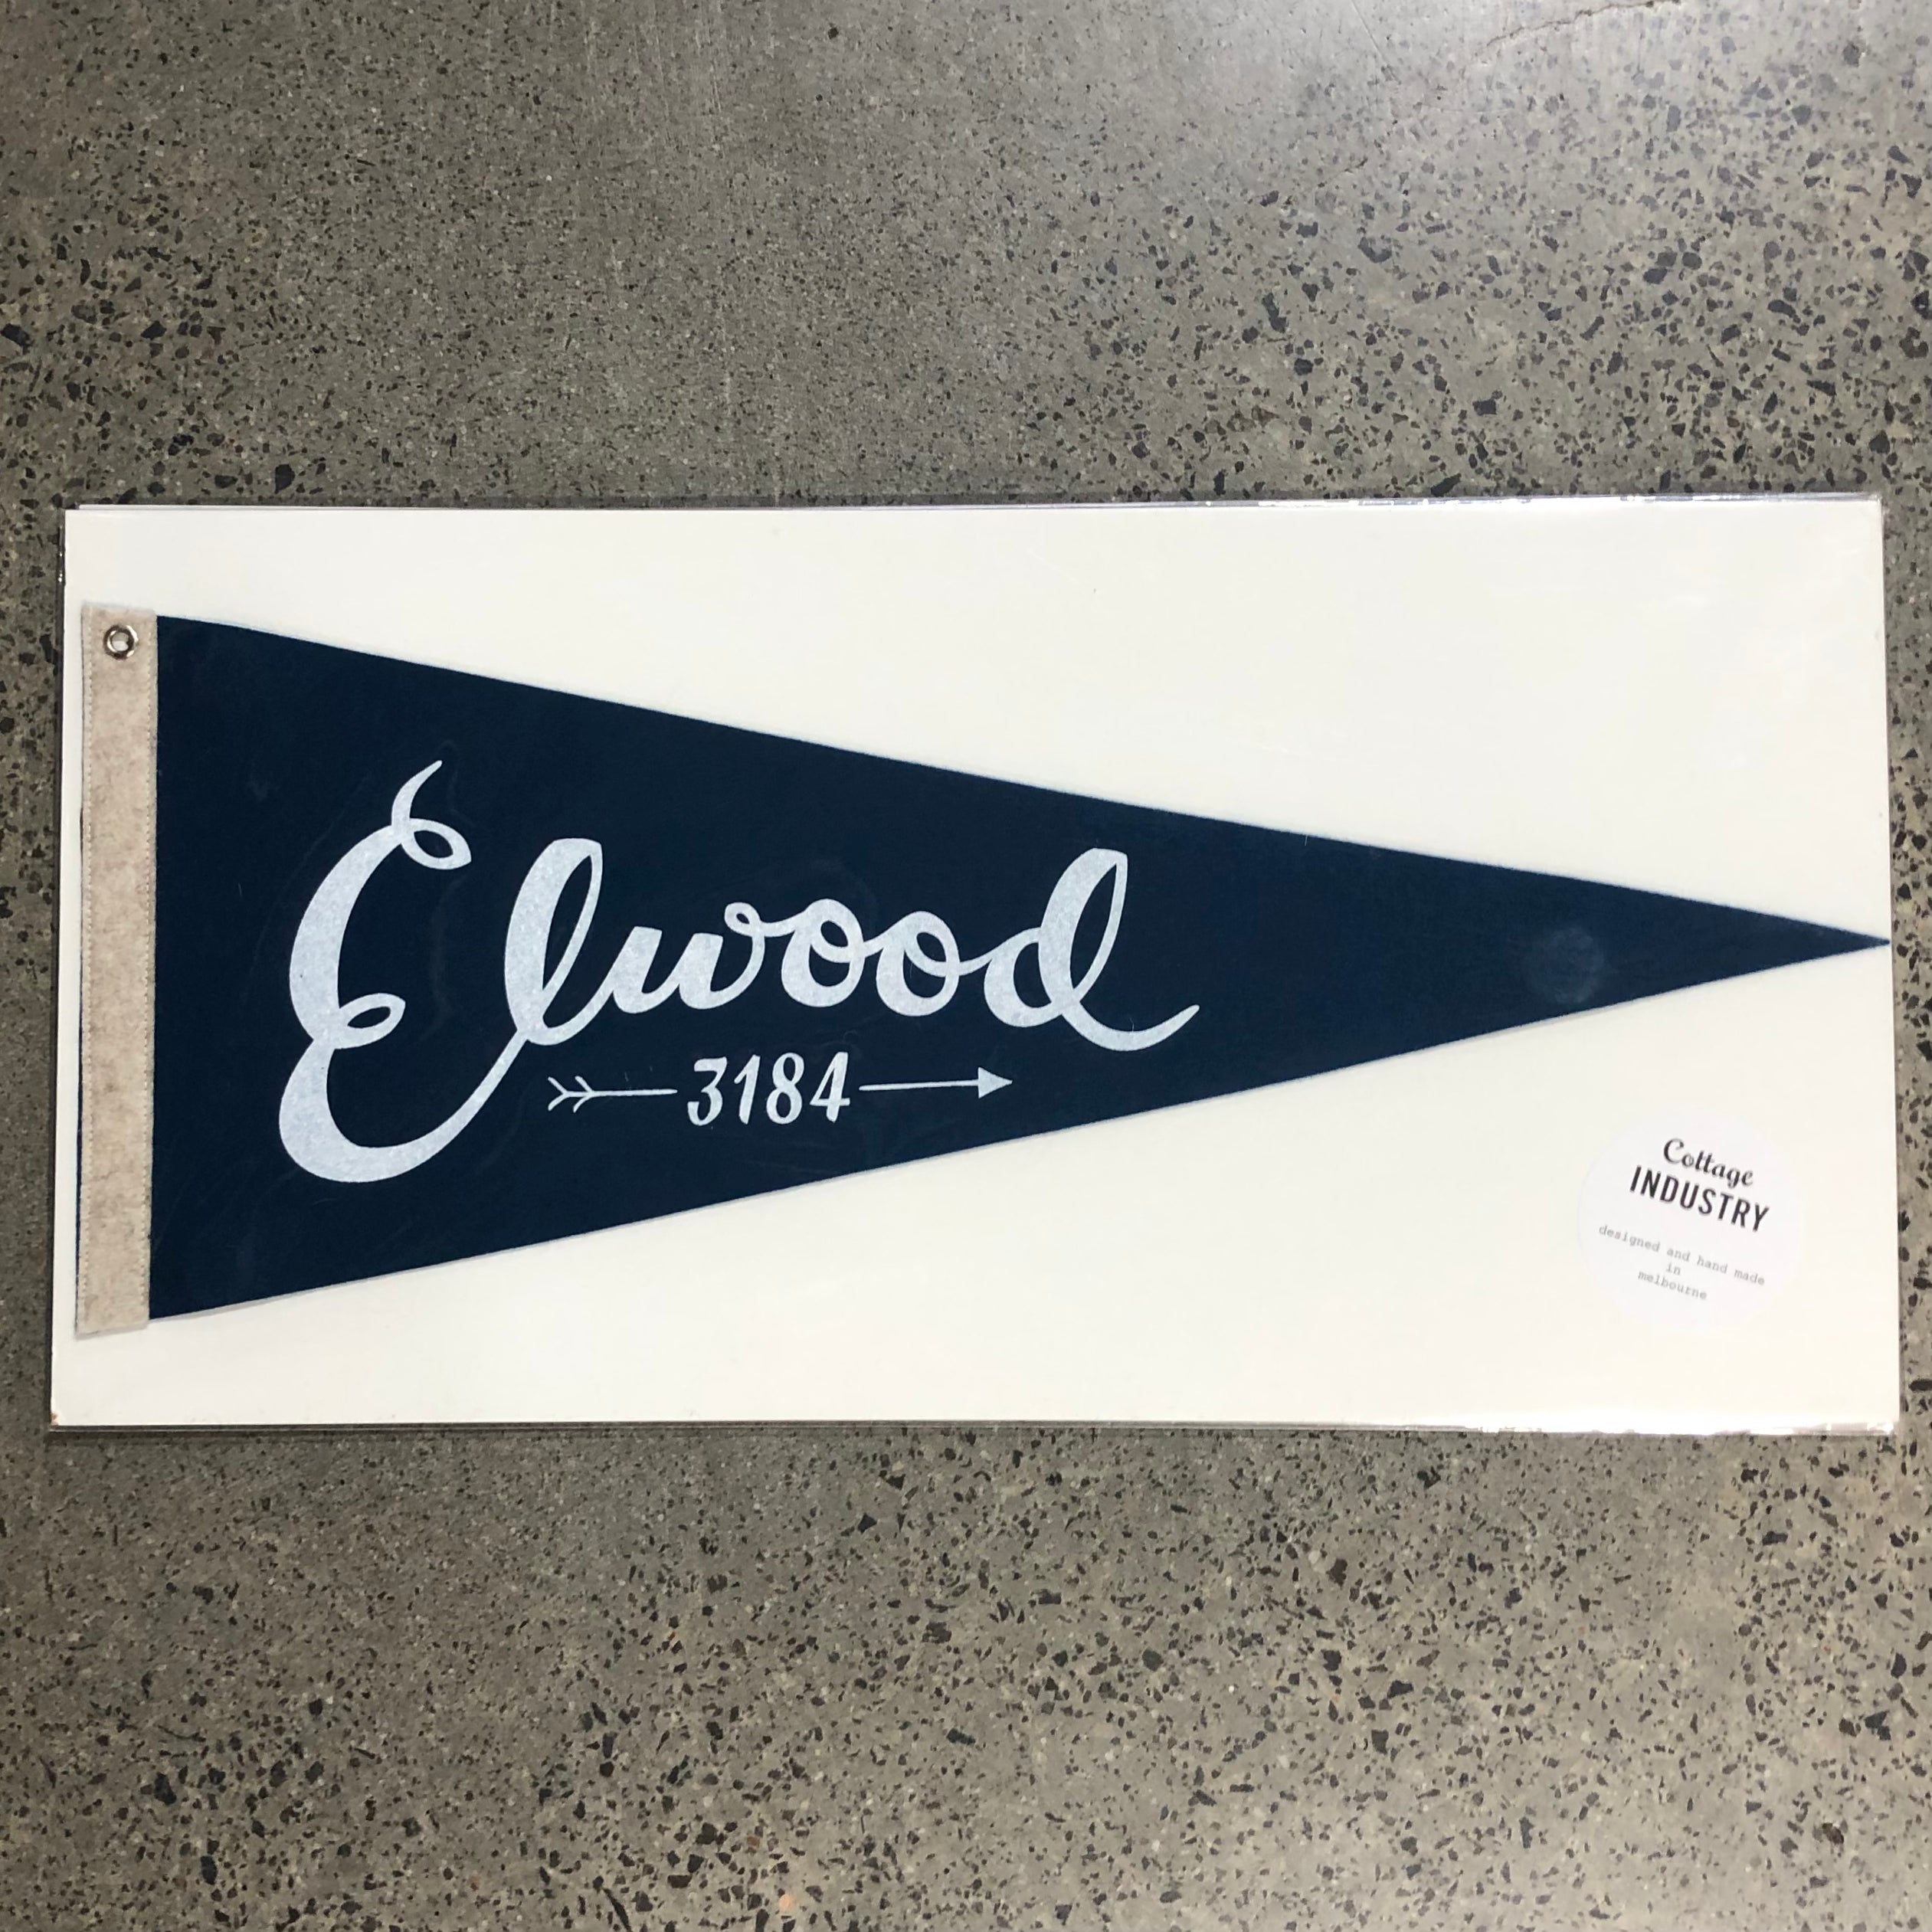 Pennant Elwood in Teal and Grey